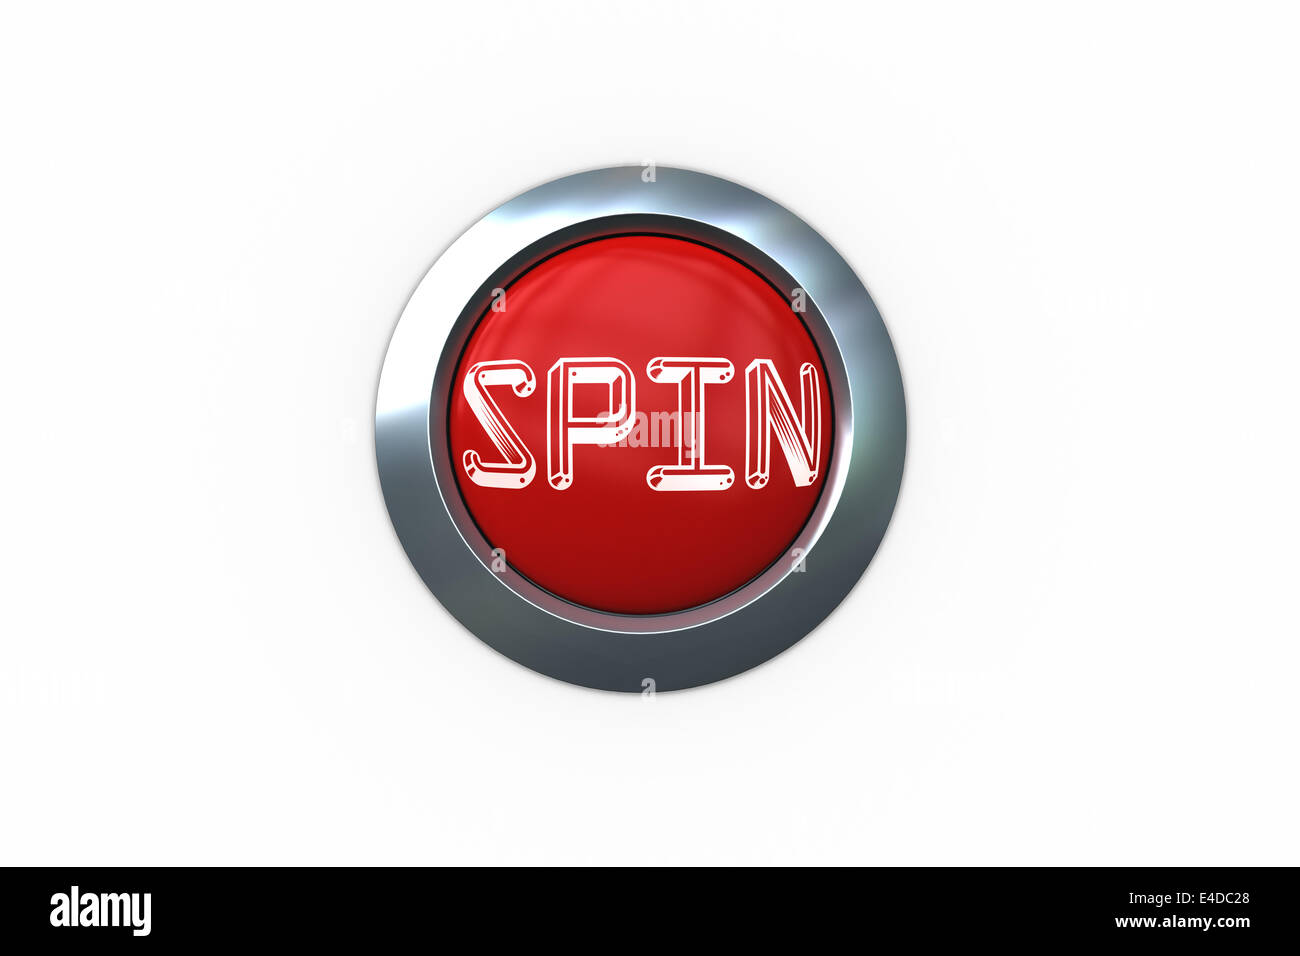 Spin on digitally generated red push button Stock Photo